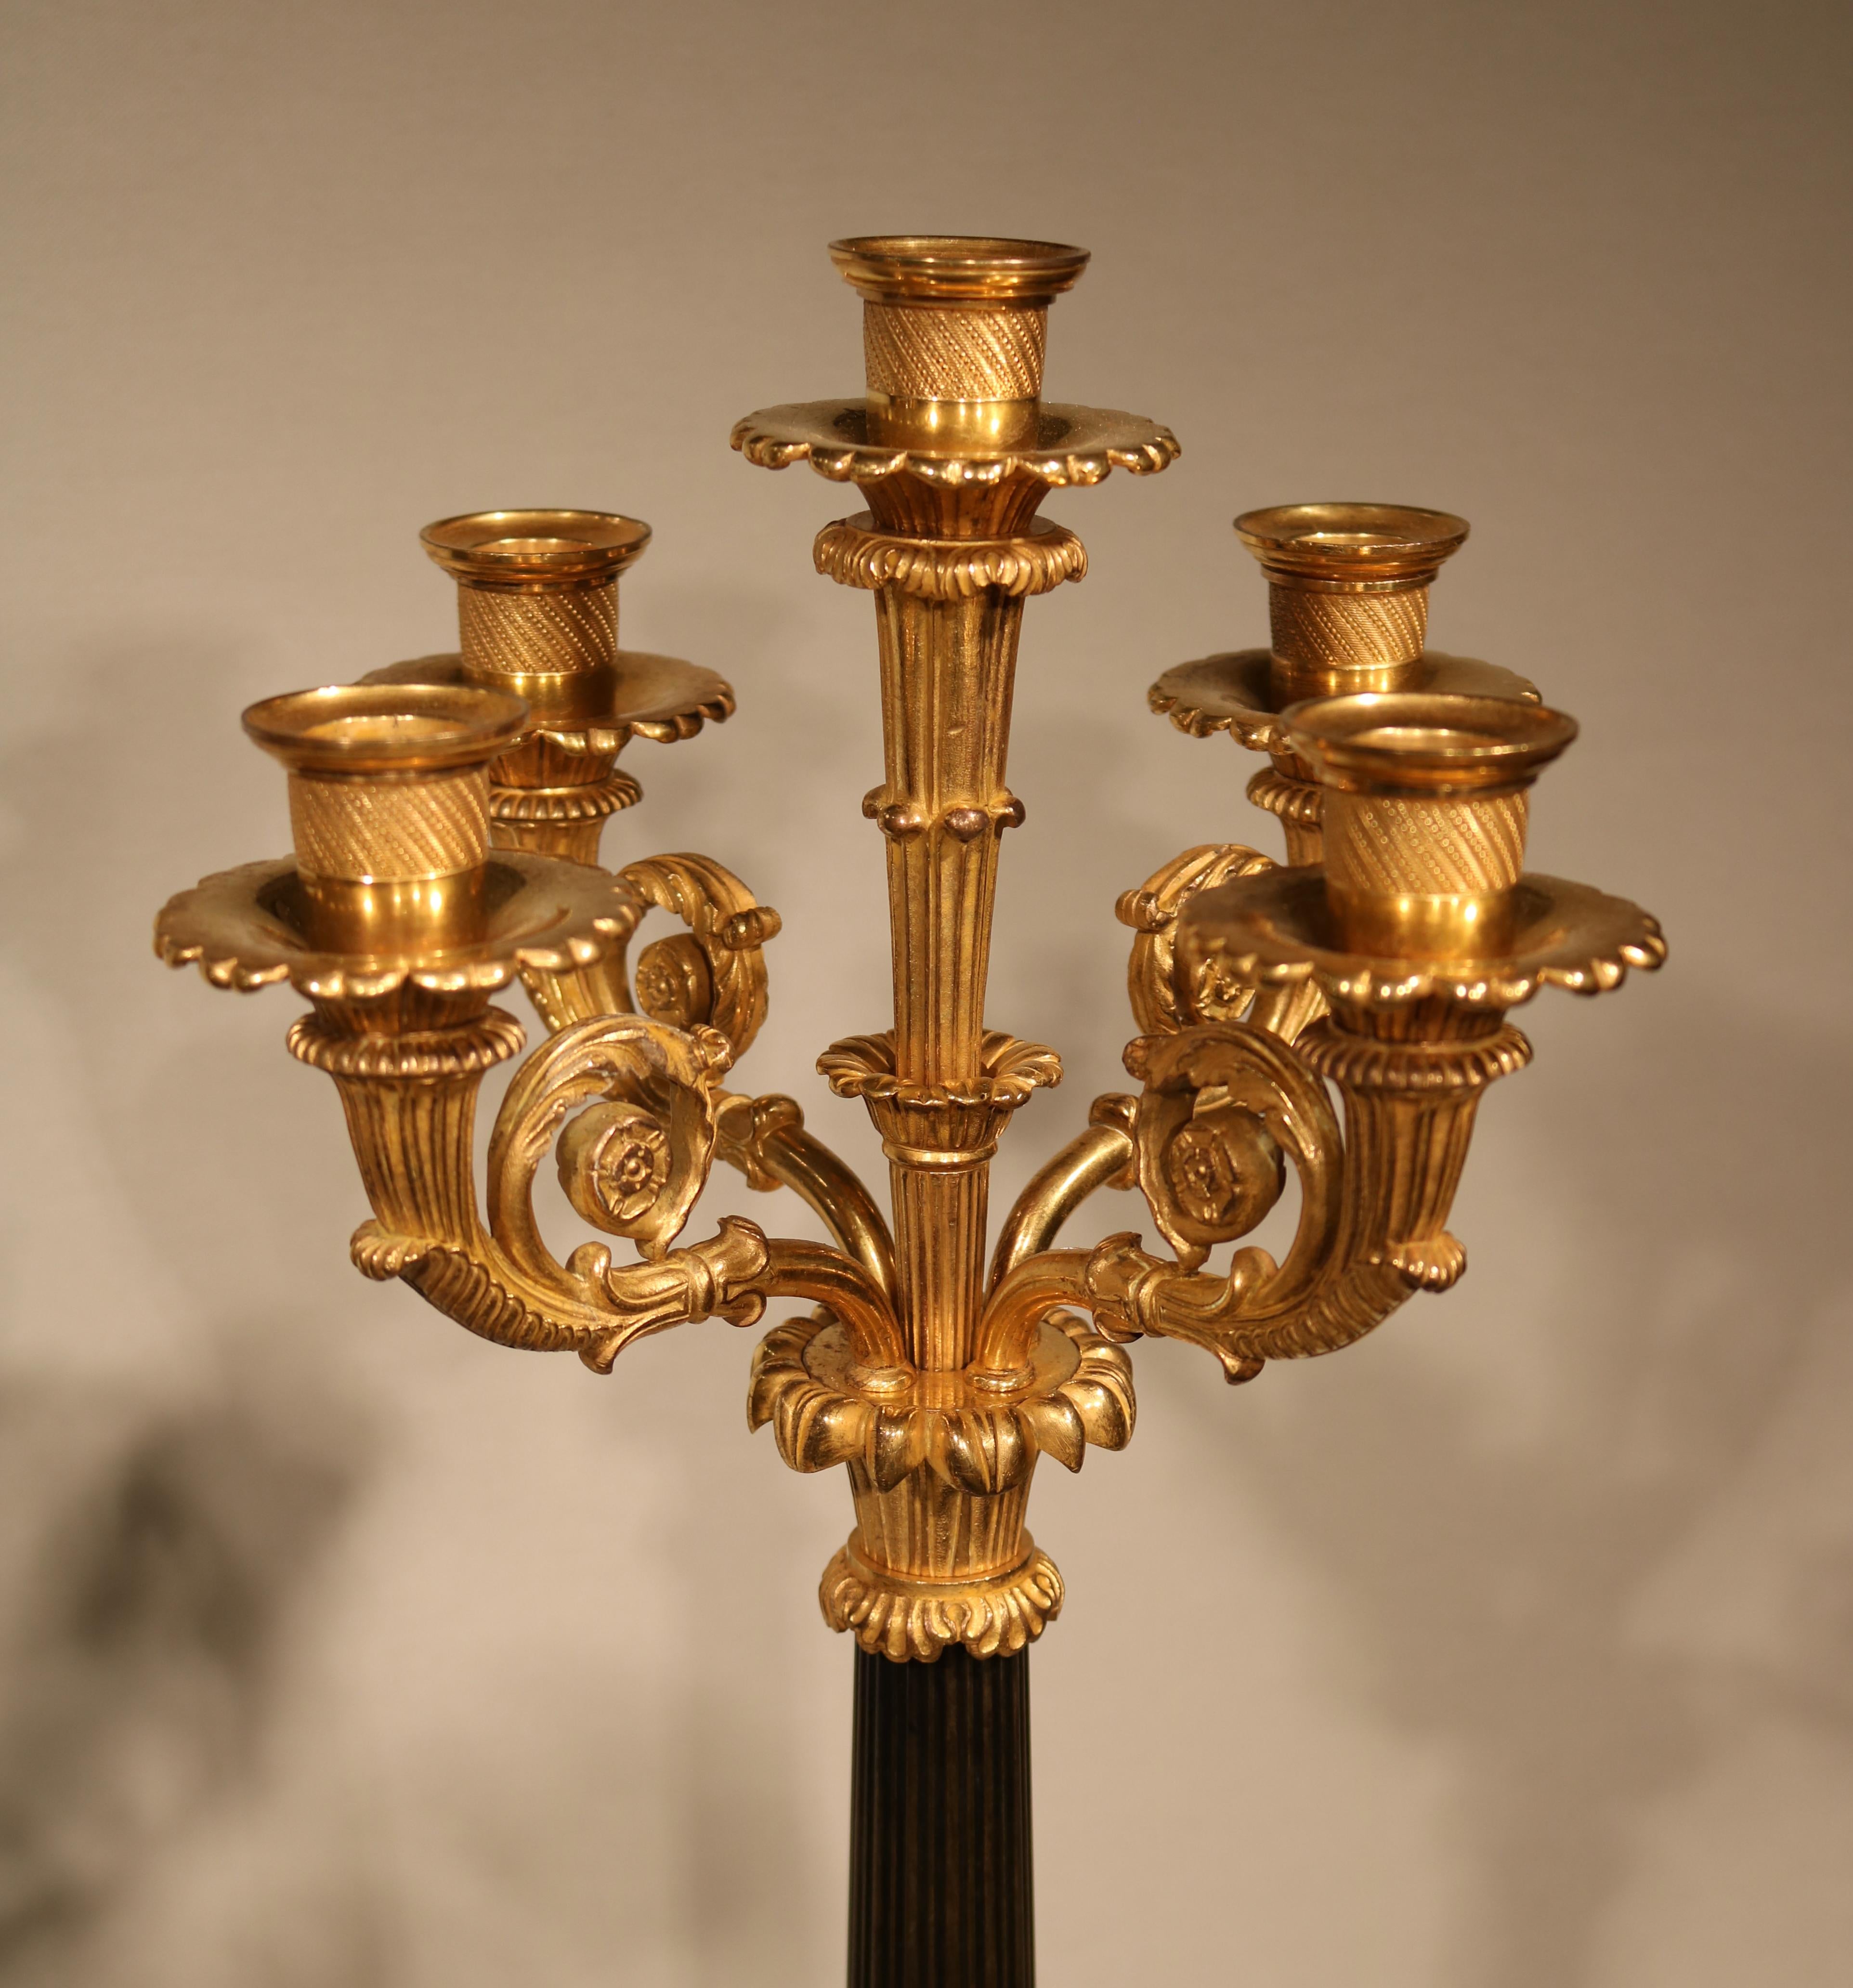 An impressive pair of early 19th century bronze and ormolu 5-light candelabra having engine turned nozzles, raised on leaf scroll arms, supported on reeded tapering stems with acanthus decorations, ending on sienna marble plinth bases with applied